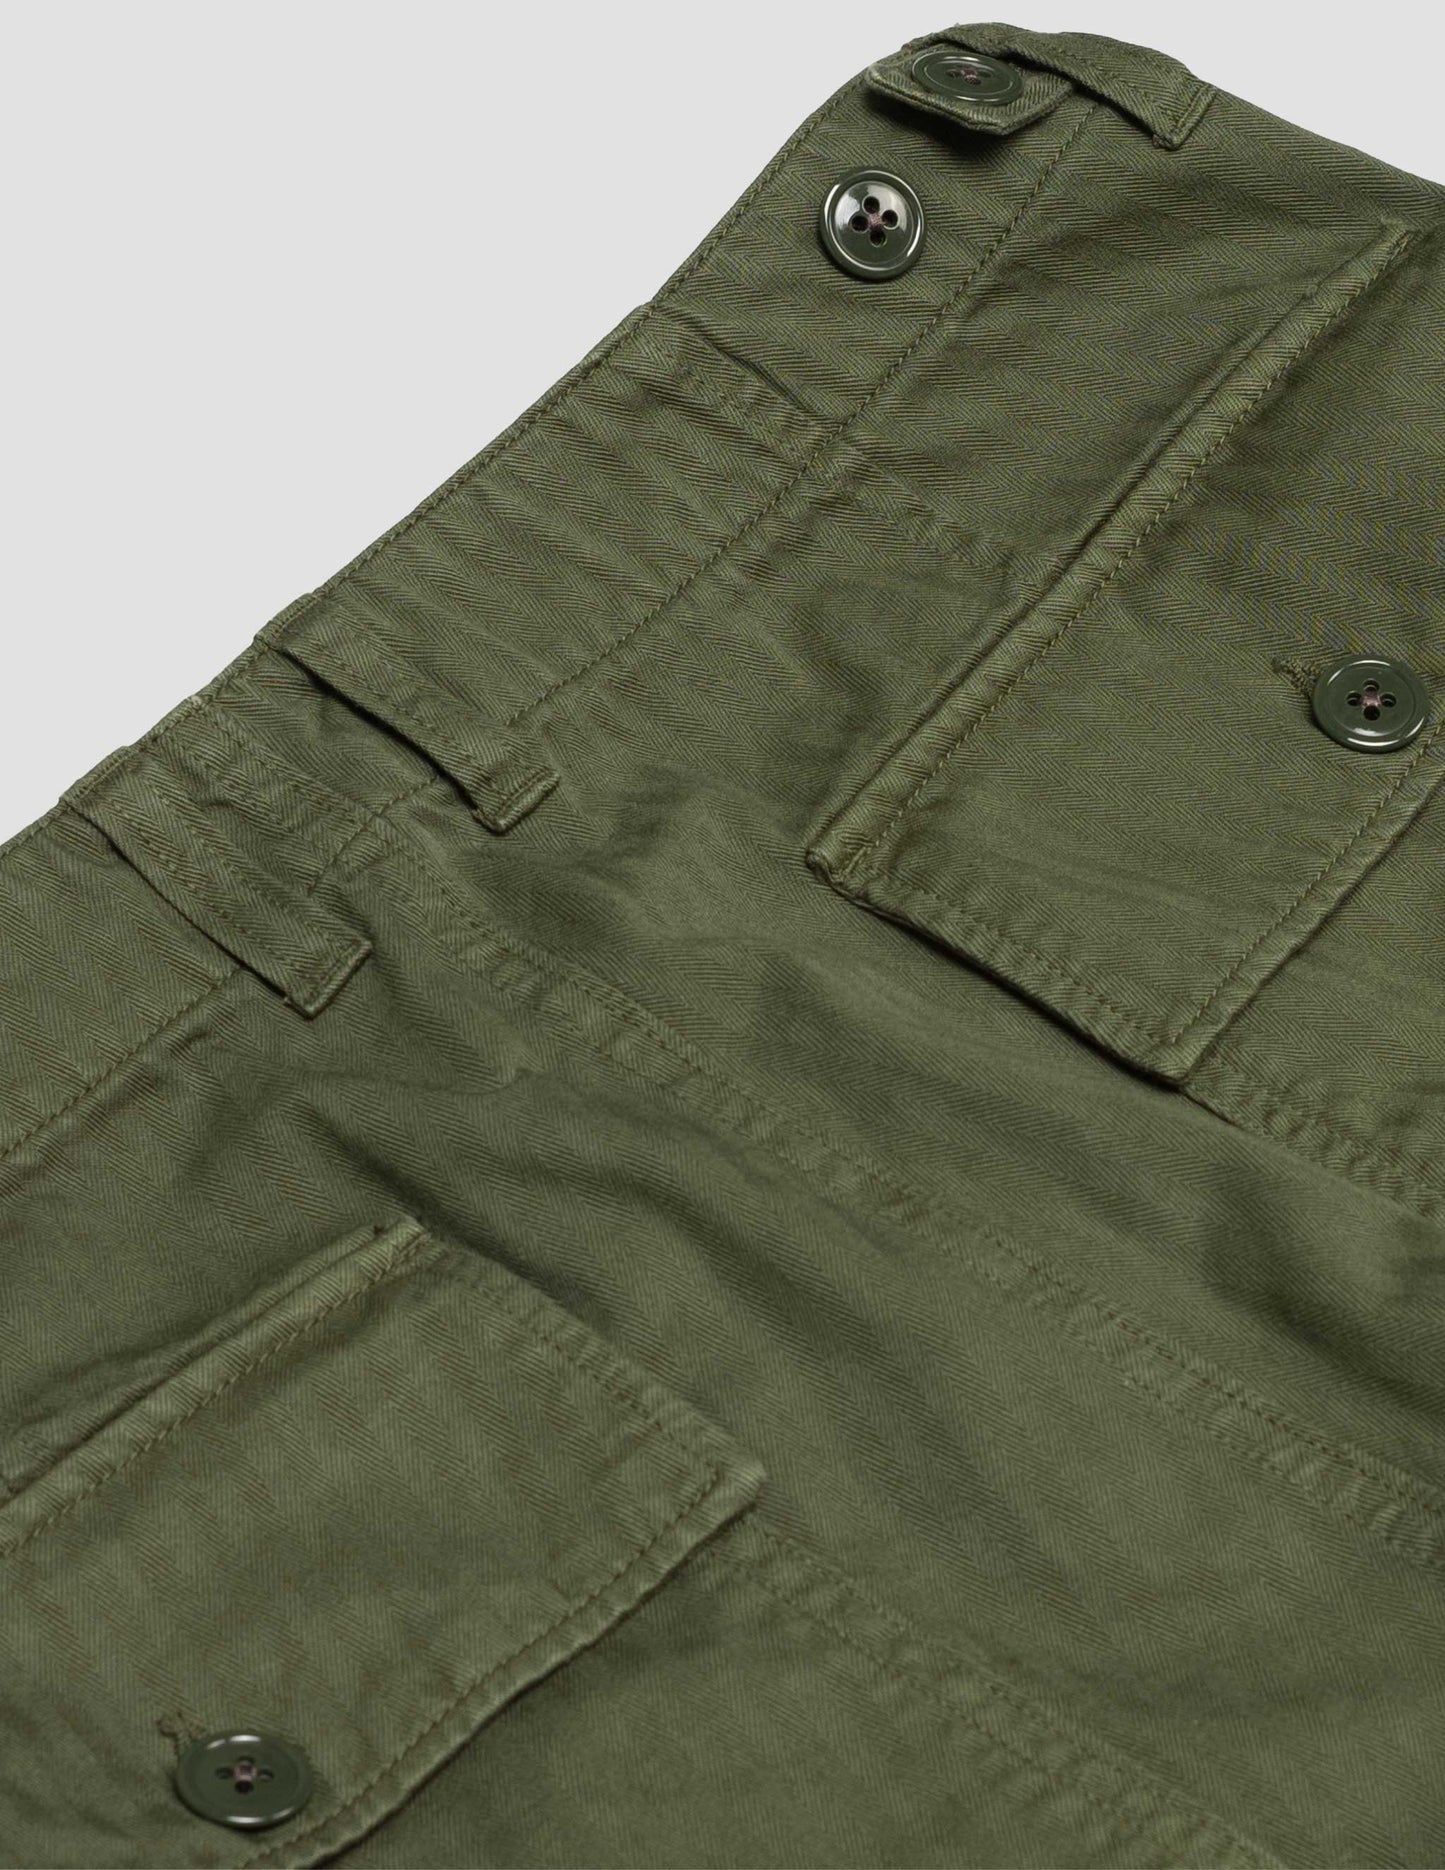 Rivay Series II Garment Dyed Utility Pant in Olive Drab